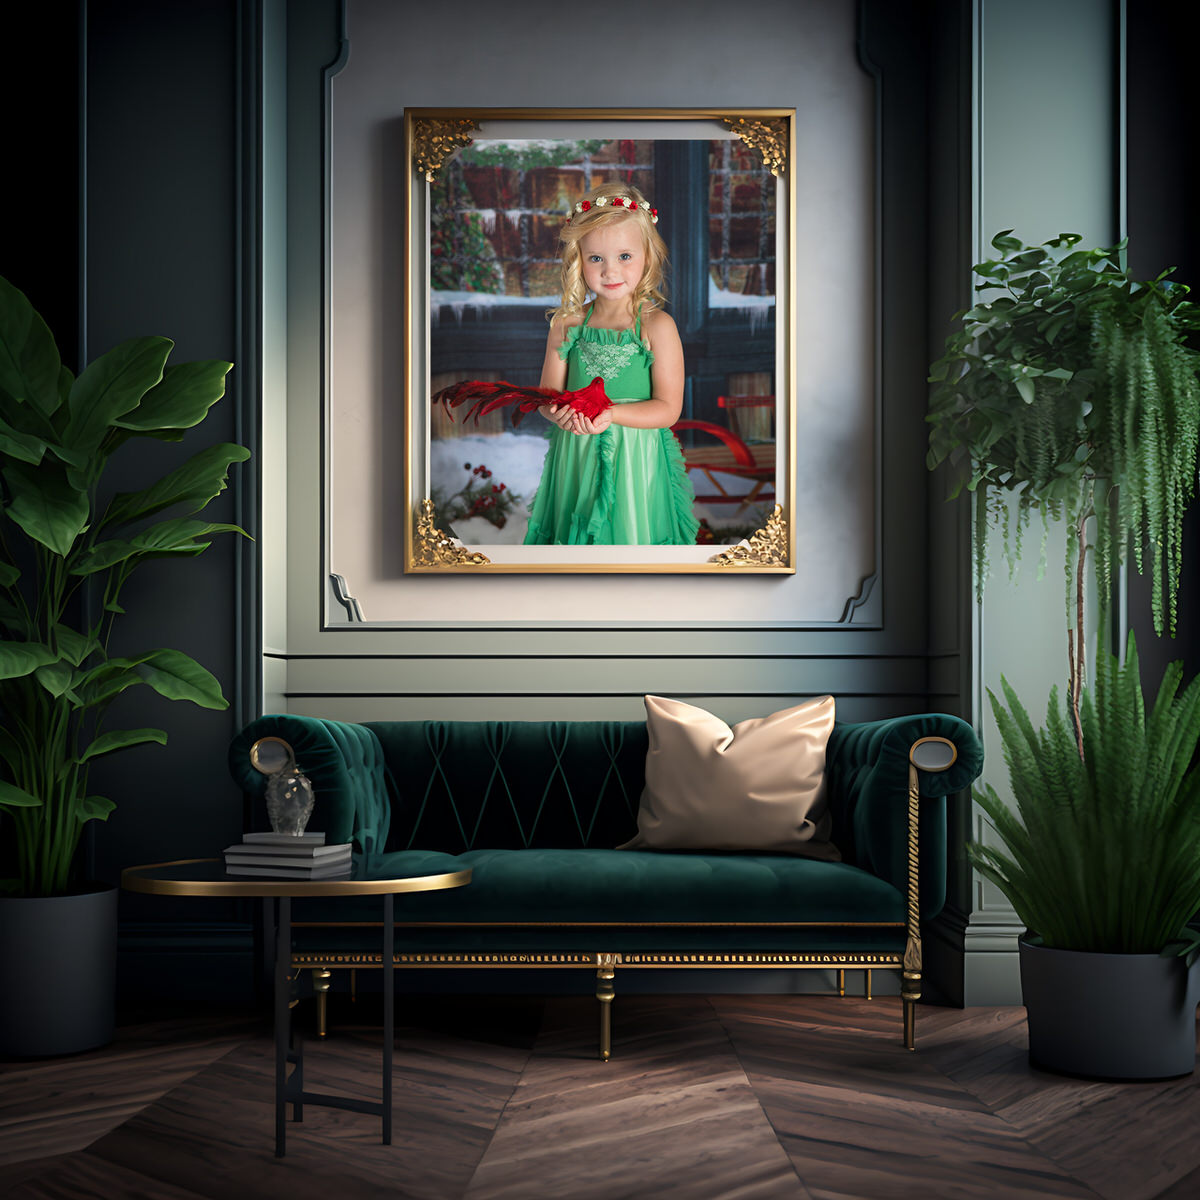 Portrait of girl in green dress posing for holiday photo hanging above couch